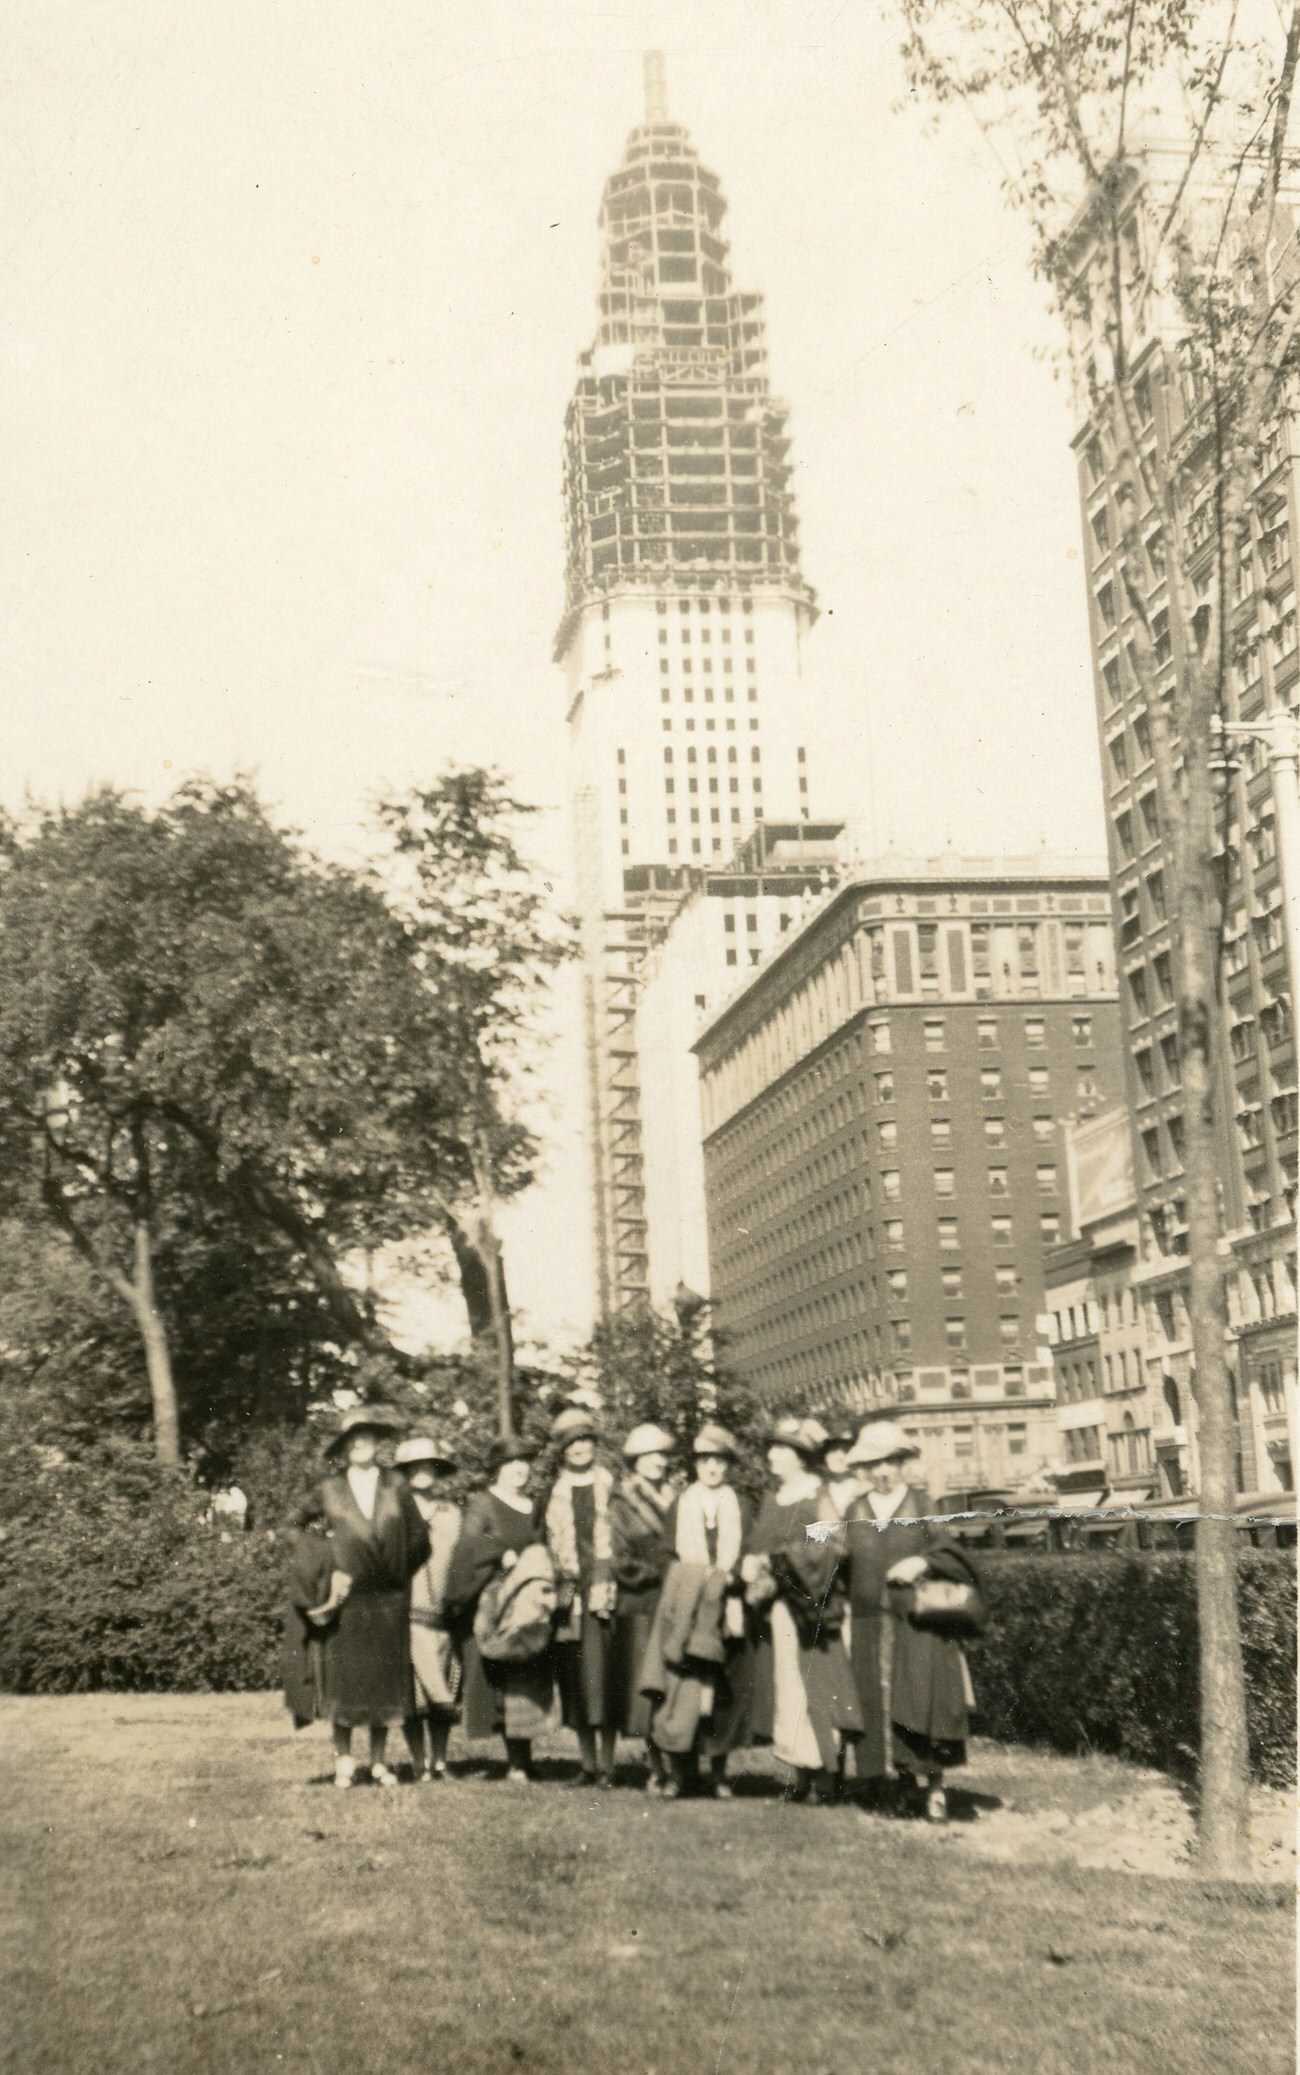 Group of women at Ohio Statehouse with the AIU Citadel under construction in the background, 1924